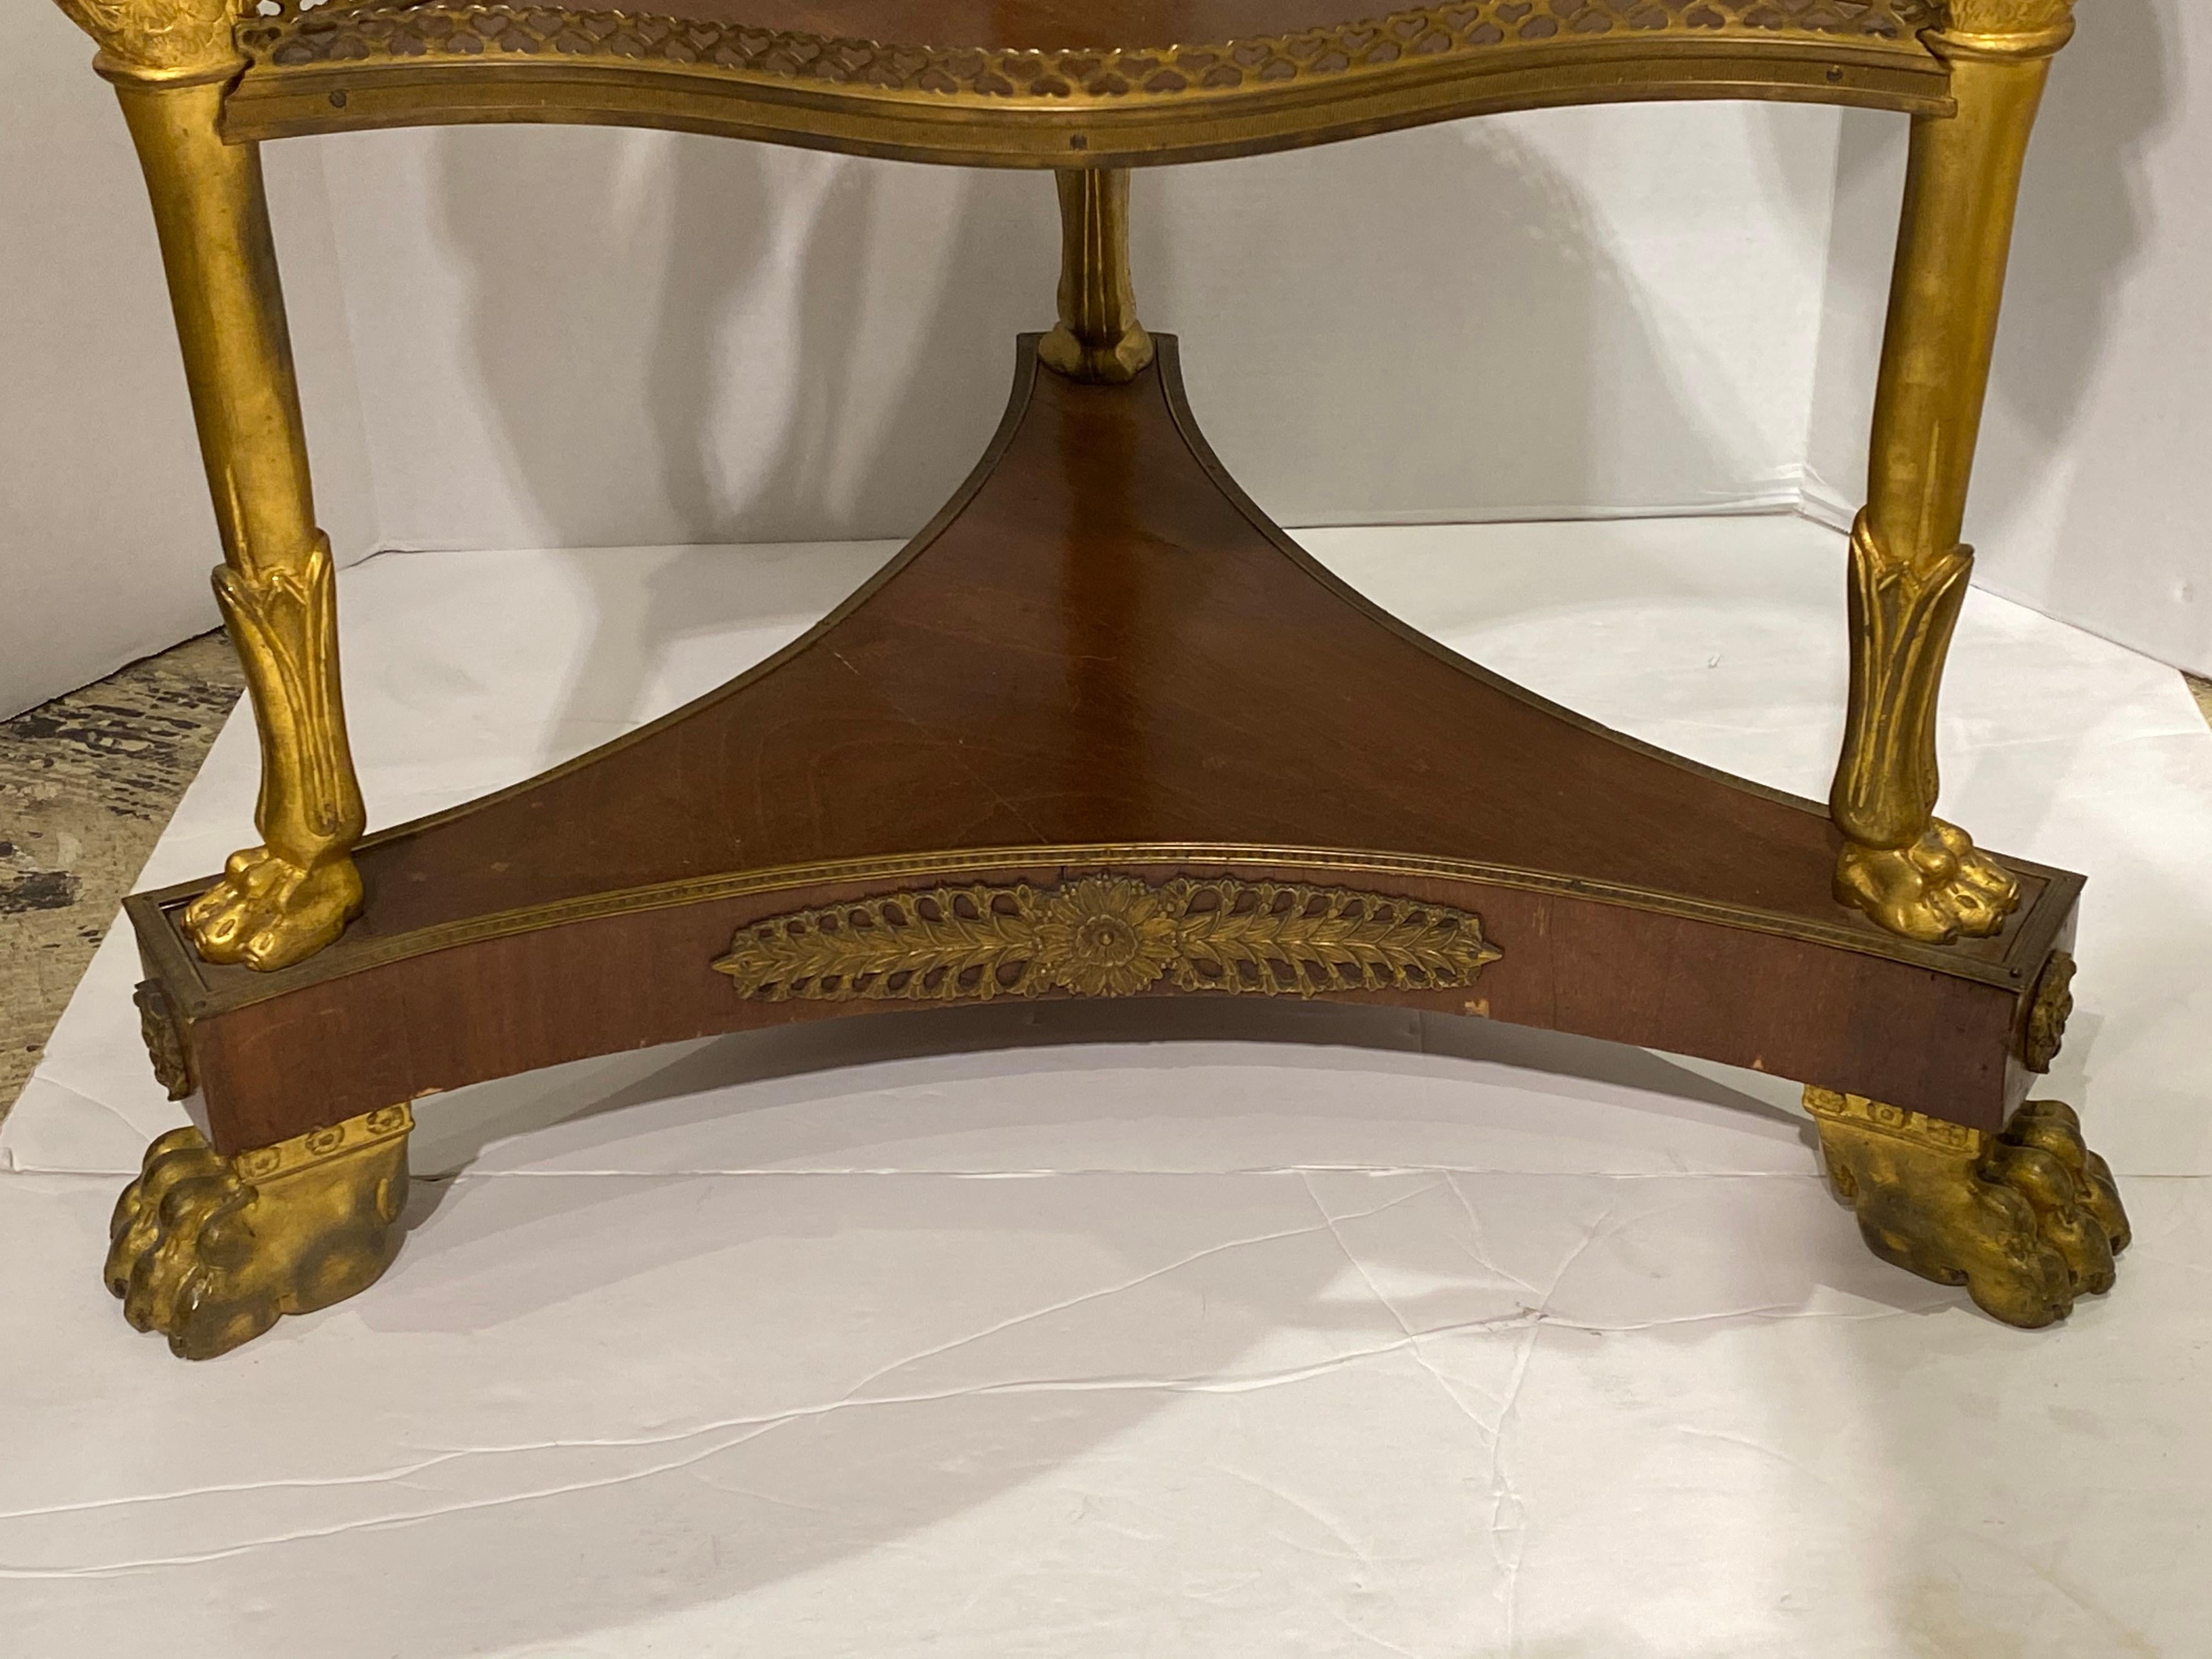 19th Century French Empire Style Gilt Bronze and Mahogany Marble-Top Gueridon Table